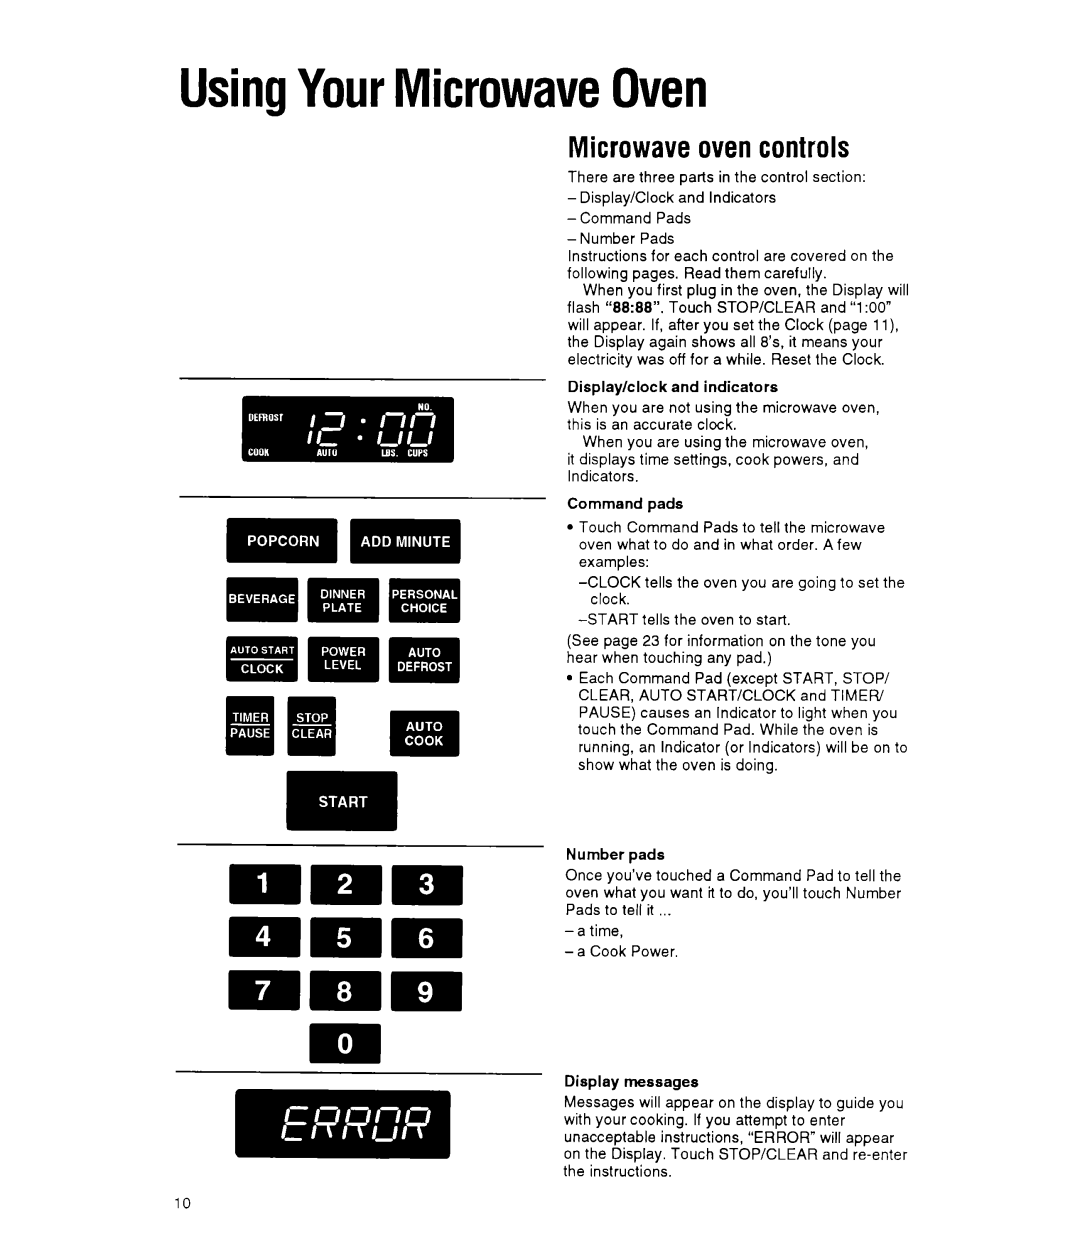 Whirlpool MT9160XY manual UsingYourMicrowaveOven, Microwave oven controls 